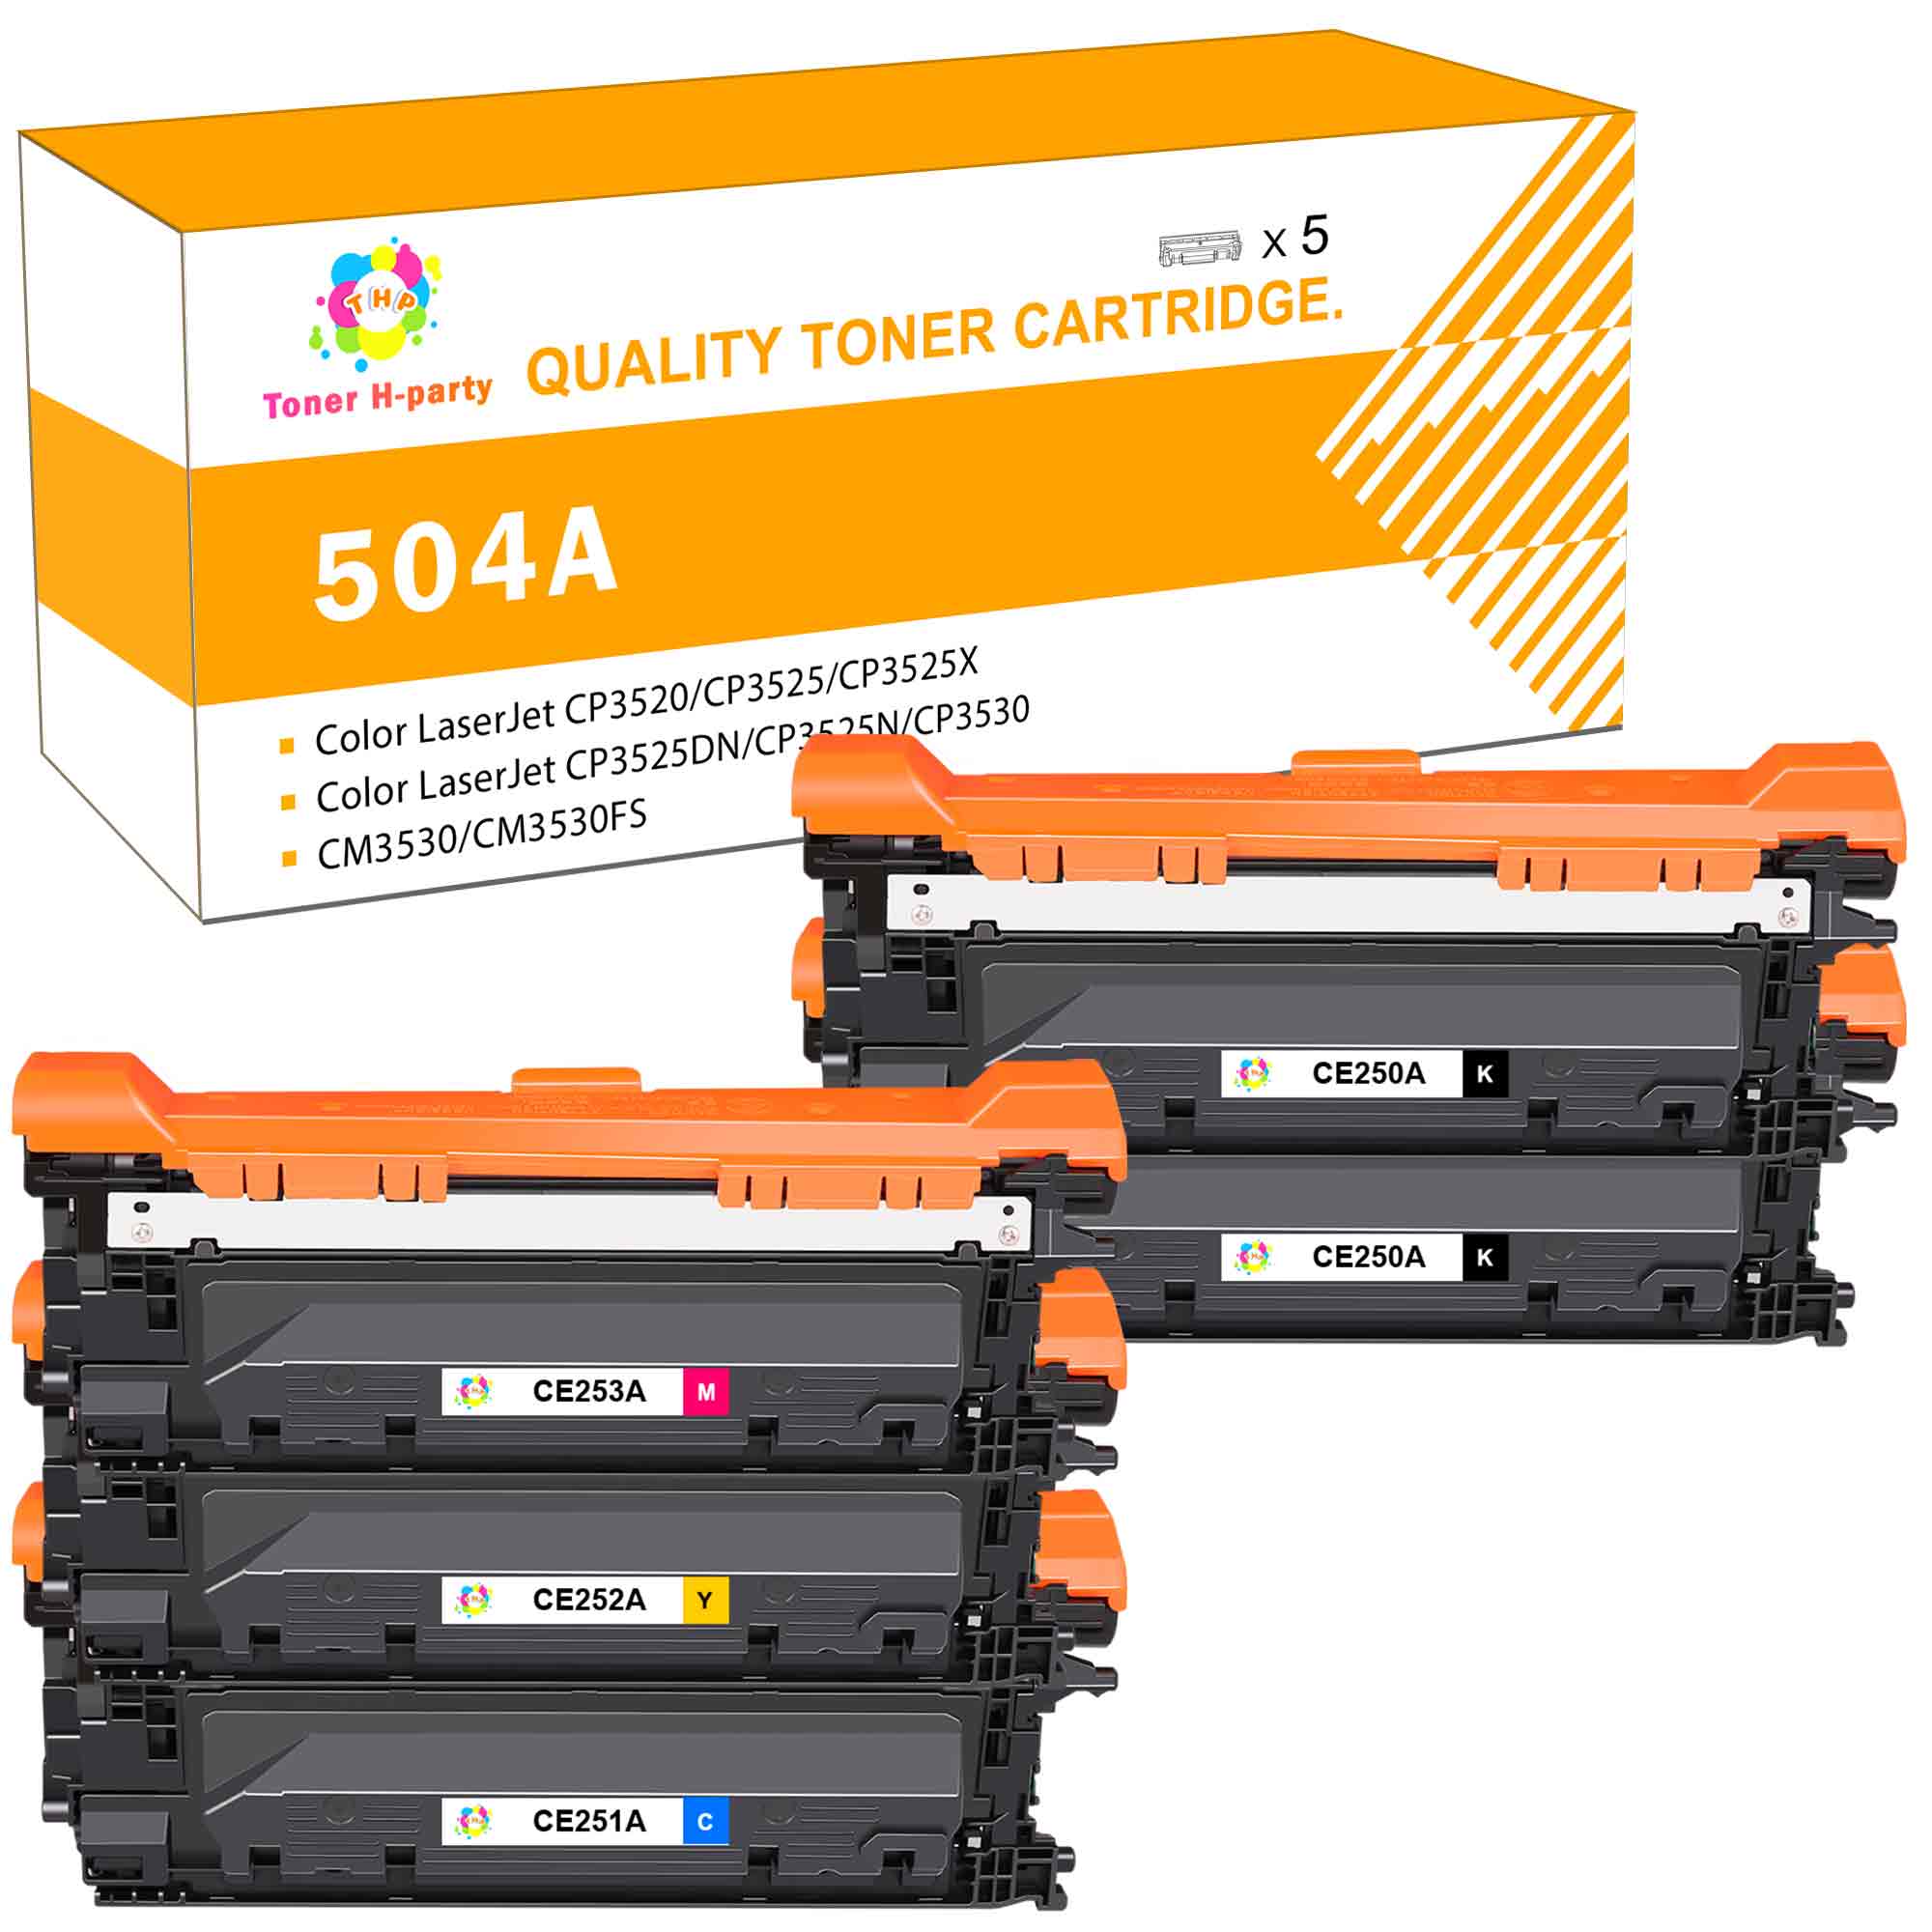 Toner H-Party Compatible Toner Cartridge for HP CE250A CE251A CE252A CE253A Color LaserJet CP3520 CP3525 CP3525X CP3525DN CP3525N CP3530, CM3530 CM3530FS (2*Black,Cyan, Magenta, Yellow,5-Pack) - image 1 of 7